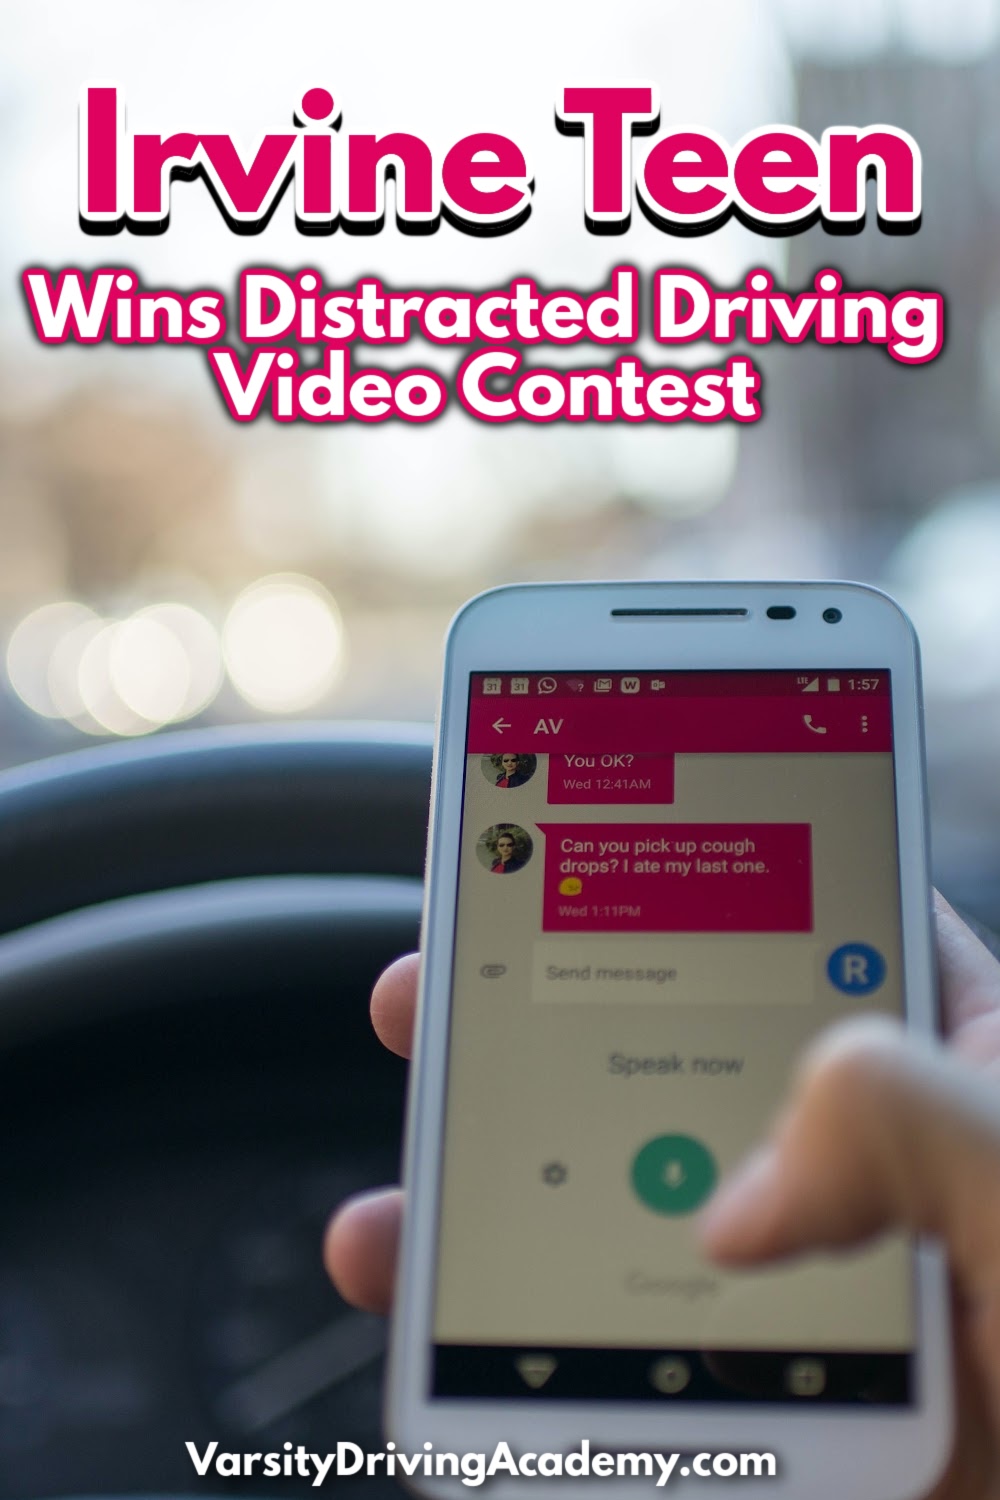 The CTIA held their second annual Drive Smart: No Distractions, No Excuses Teen Digital Short Contest and the winner is an Irvine Teen.